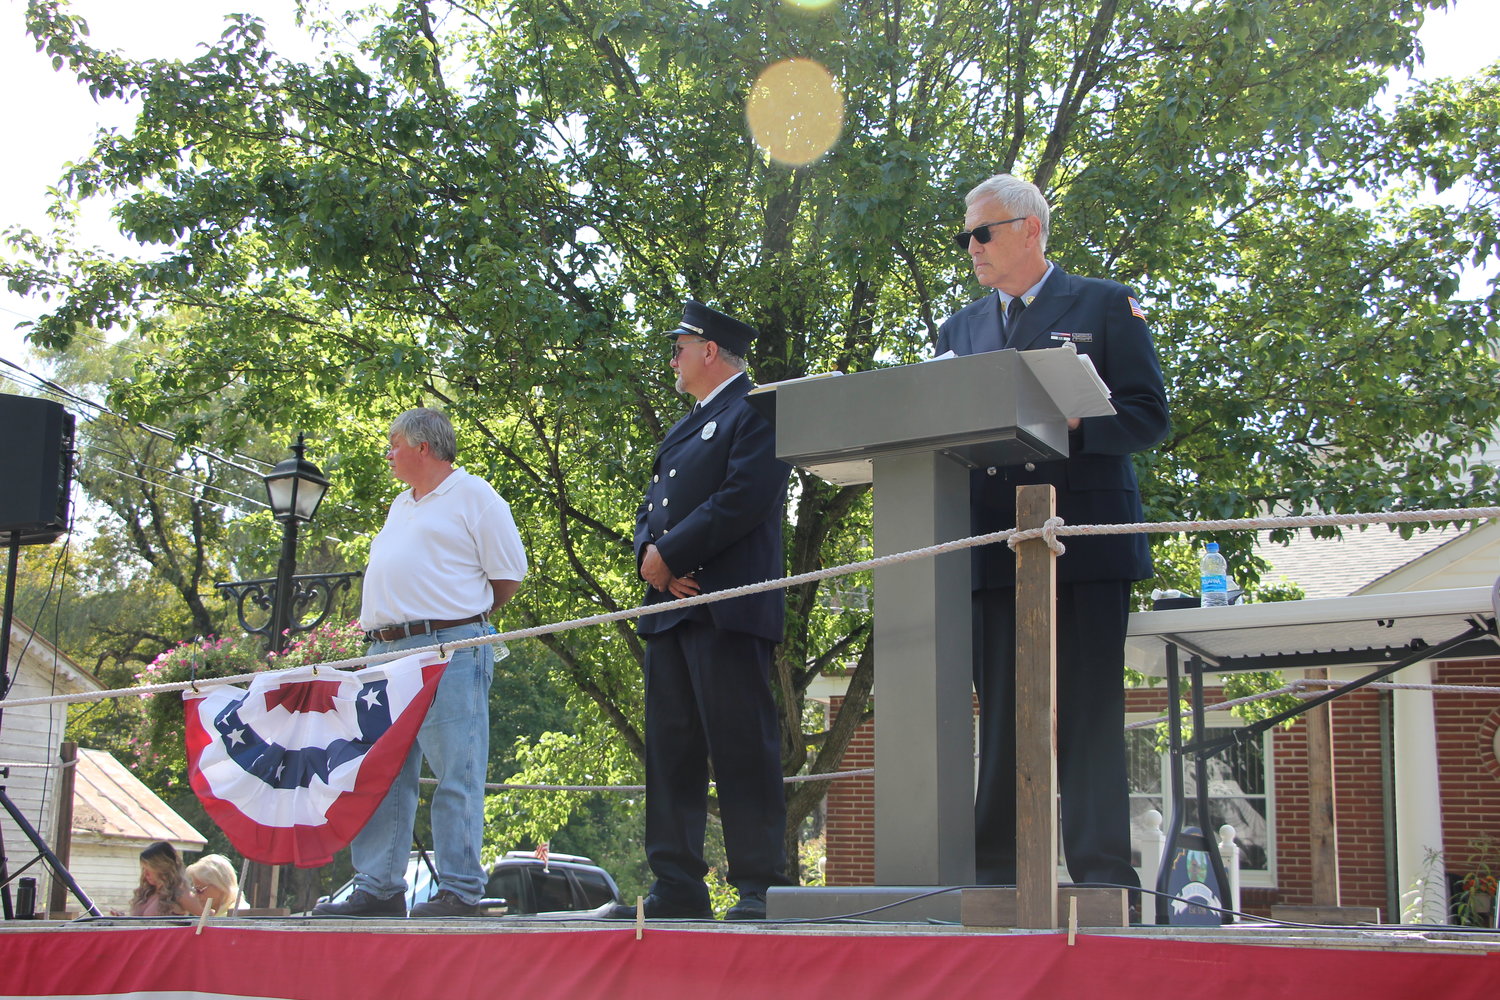 (l-r) County Clerk Russell Reeves, Town of Neversink Supervisor Chris Mathews and Master of Ceremonies, the Honorable Mark Meddaugh on the reviewing platform at the 92nd Annual Sullivan County Volunteer Firefighter’s Association parade in Grahamsville on Saturday.